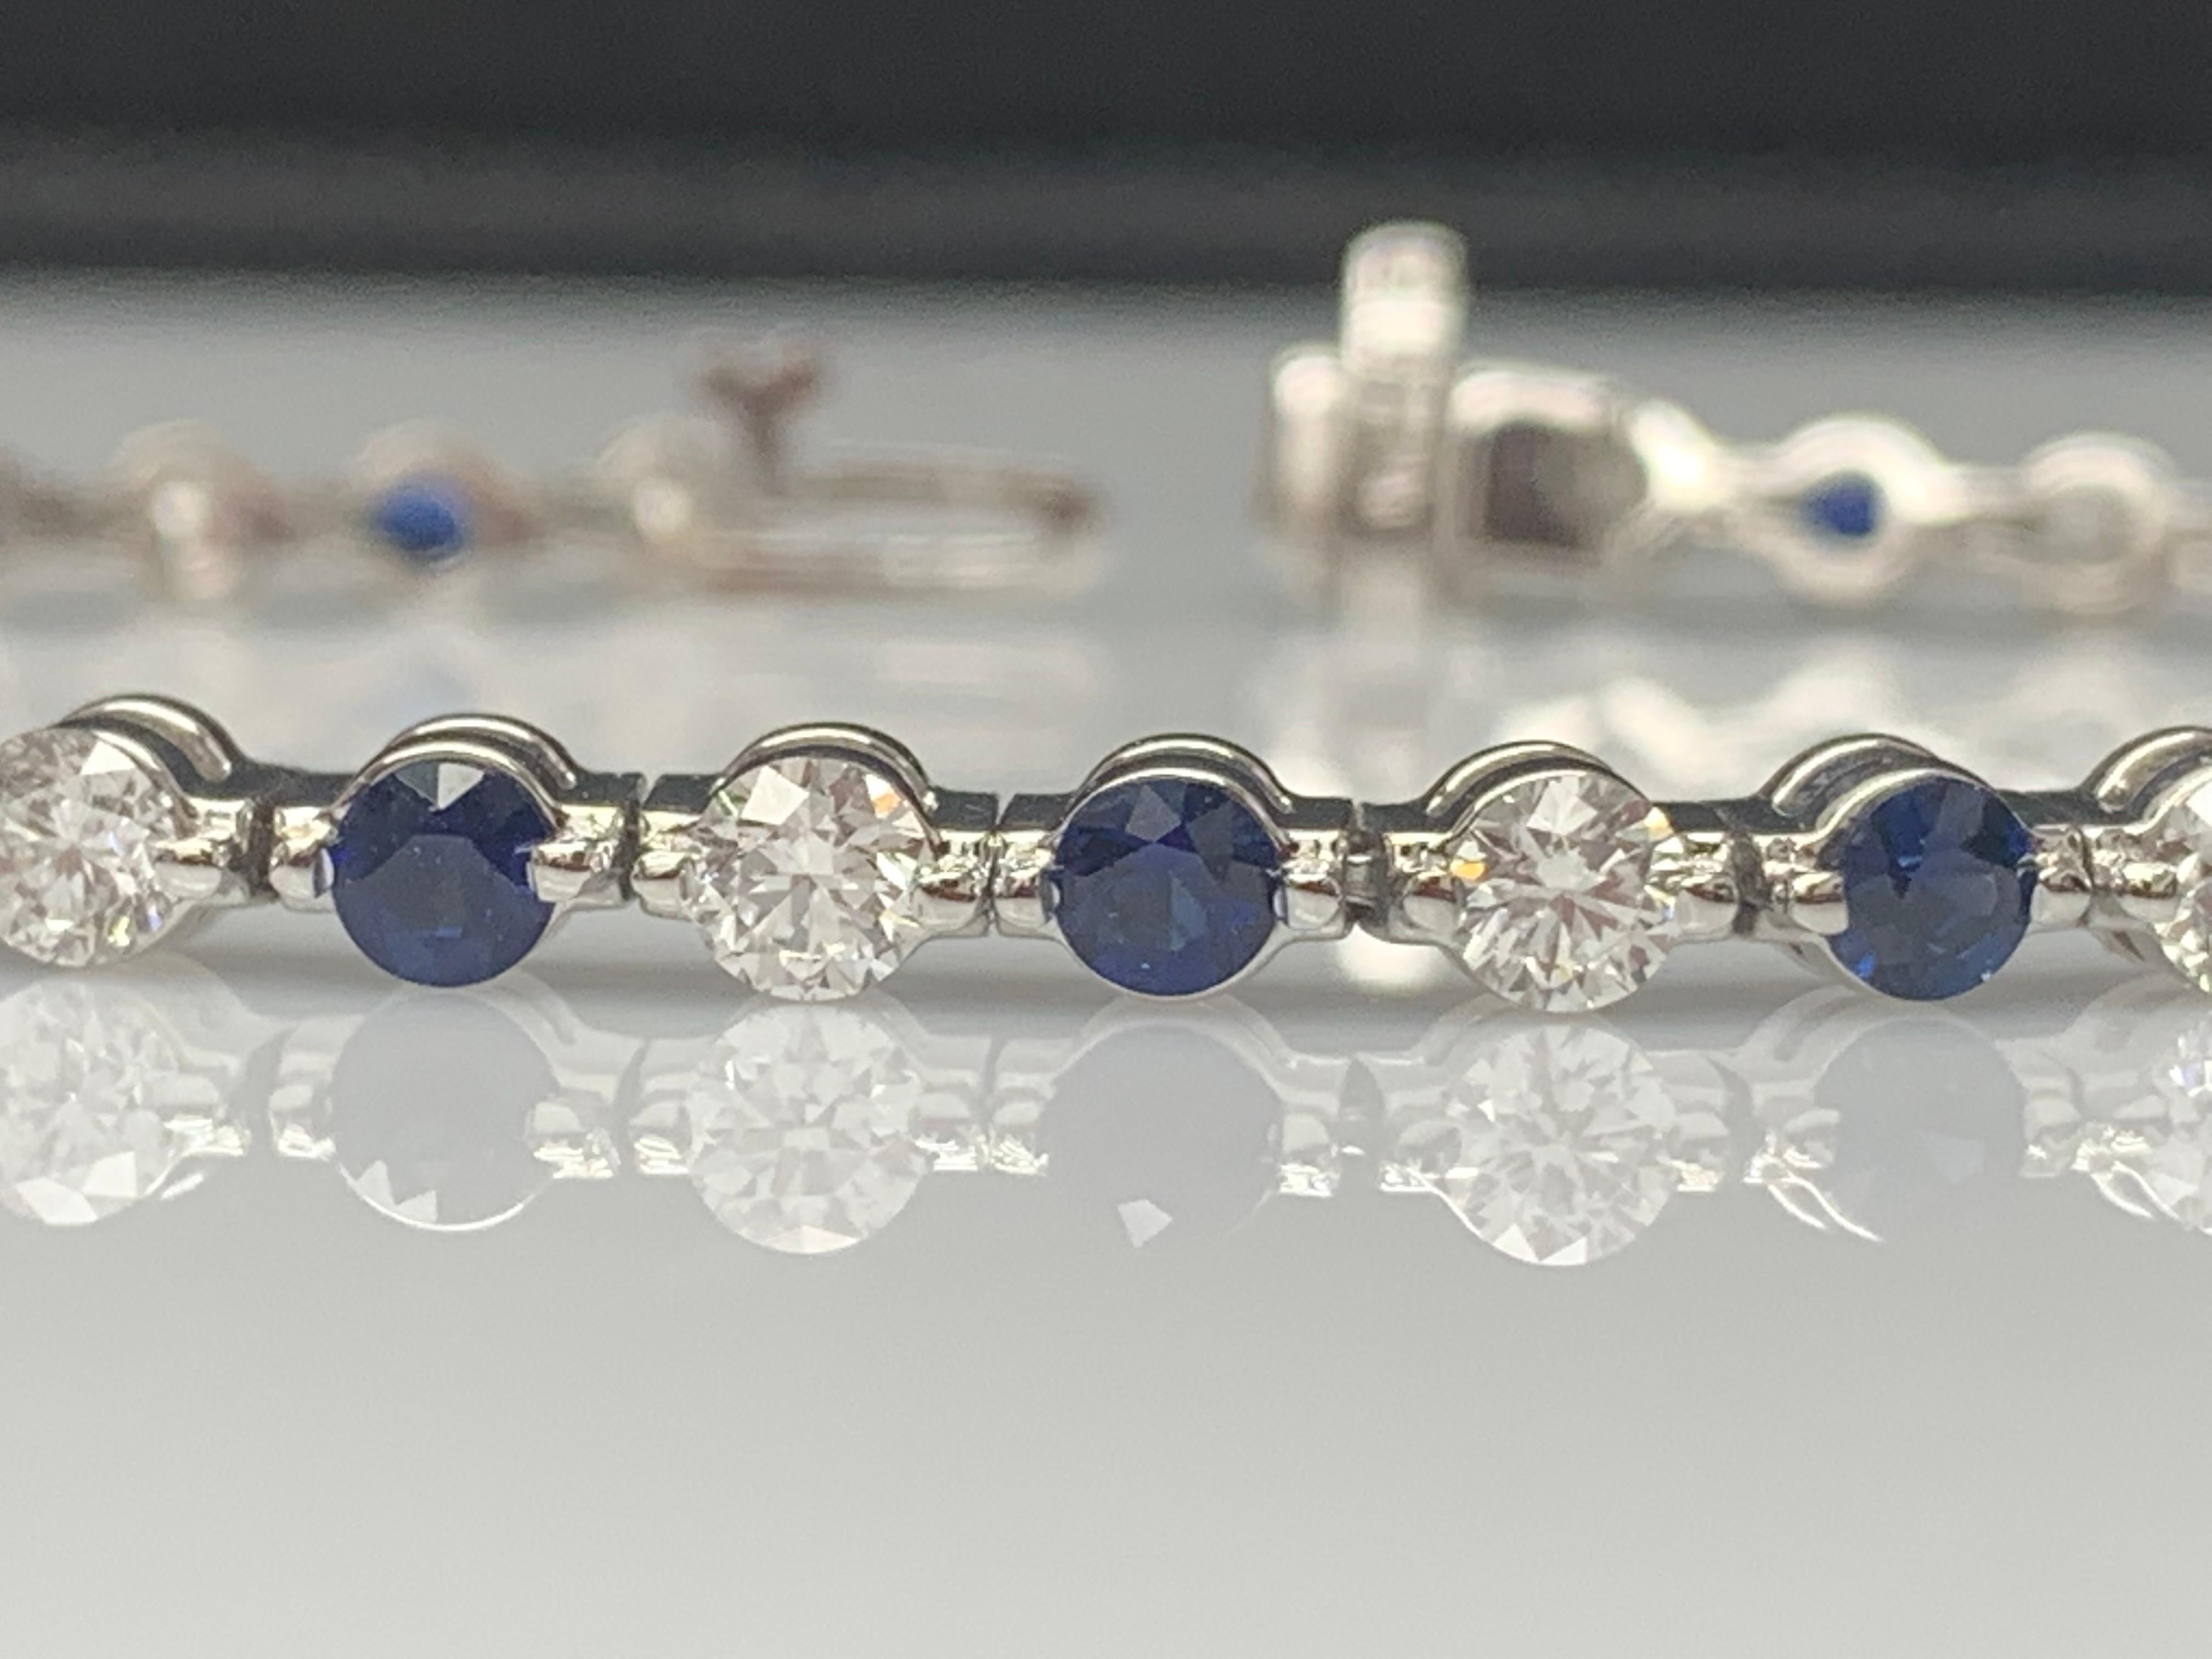 A stunning bracelet set with 18 Vibrant Blue sapphires weighing 3.18 carat total. Alternating these blue sapphires are 18 sparkling brilliant-cut round diamonds weighing 2.88 carats in total. Set in polished 14k white gold. Double lock mechanism for